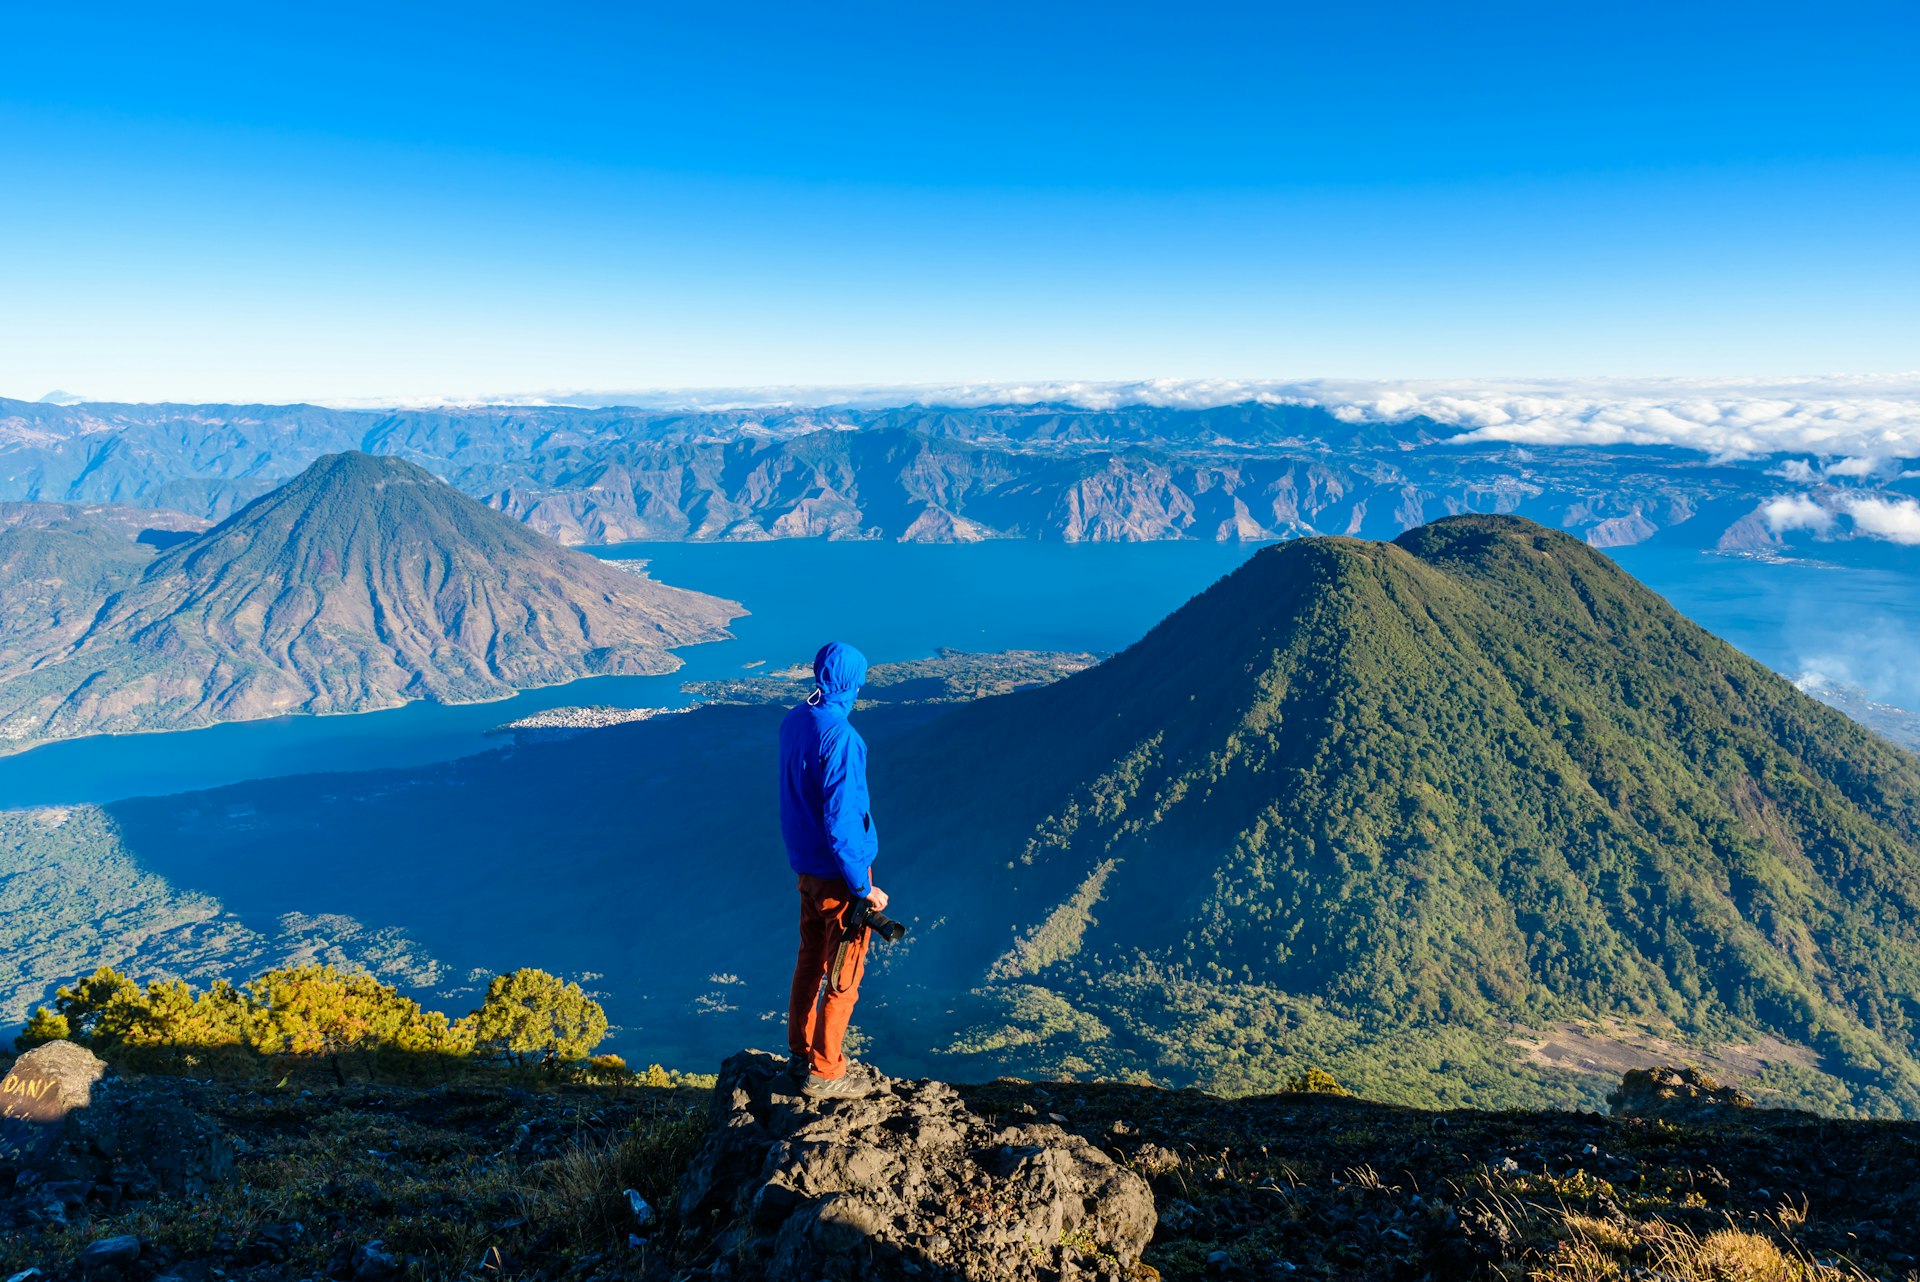 Hiker with panorama view of Lake Atitlan and volcano San Pedro and Toliman early in the morning from peak of volcano Atitlan, Guatemala. Hiking and climbing on Vulcano Atitlan